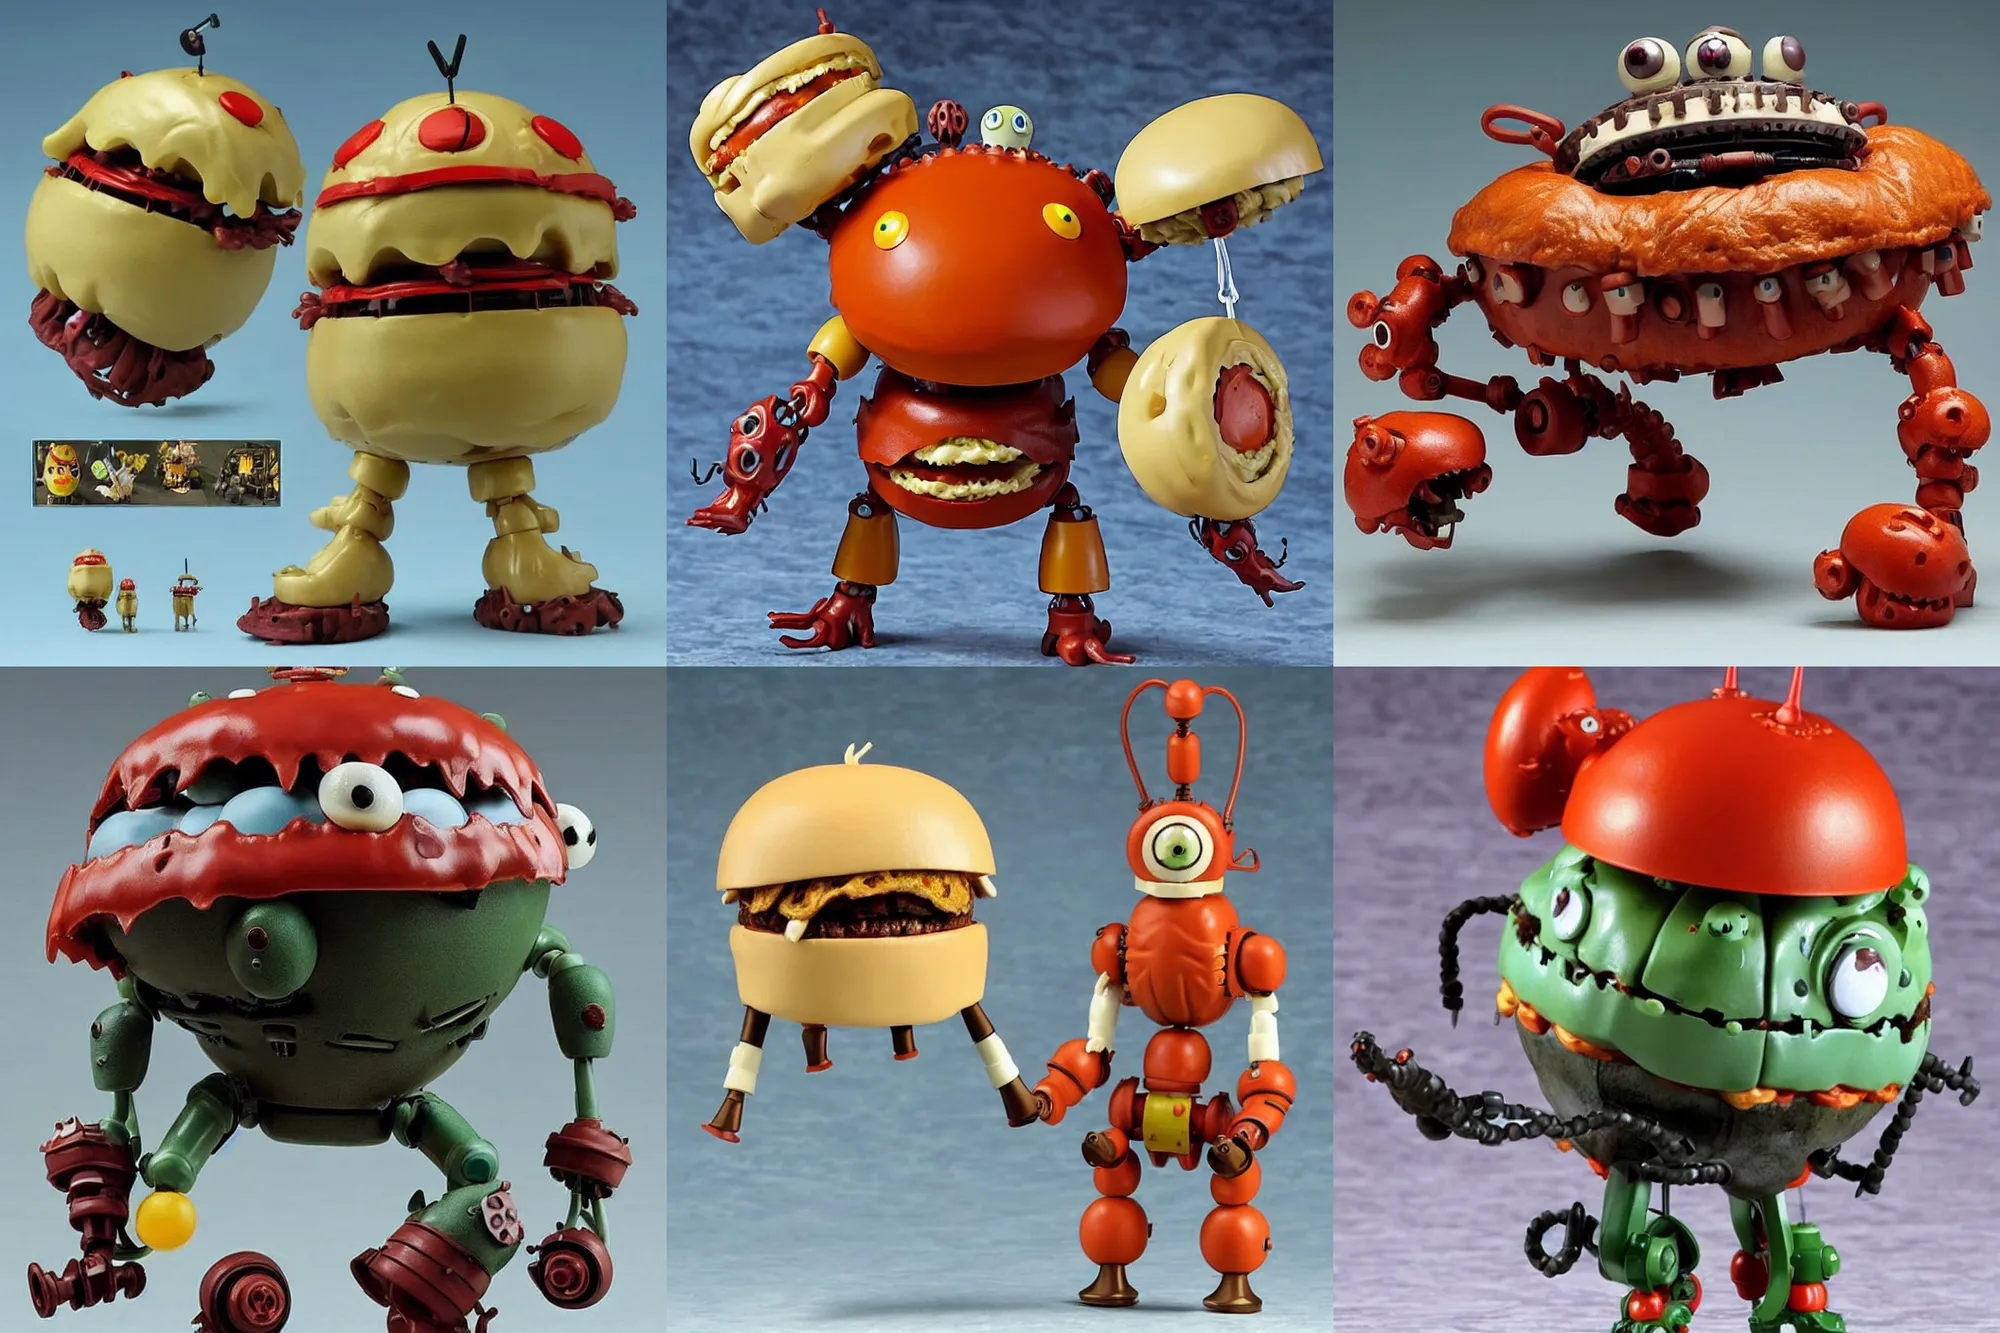 Prompt: A Lovecraftian scary giant mechanized adorable hamburger from Studio Ghibli Howl's Moving Castle (2004) as a 1980's Kenner style action figure, 5 points of articulation, full body, 4k, highly detailed. award winning sci-fi. look at all that detail!